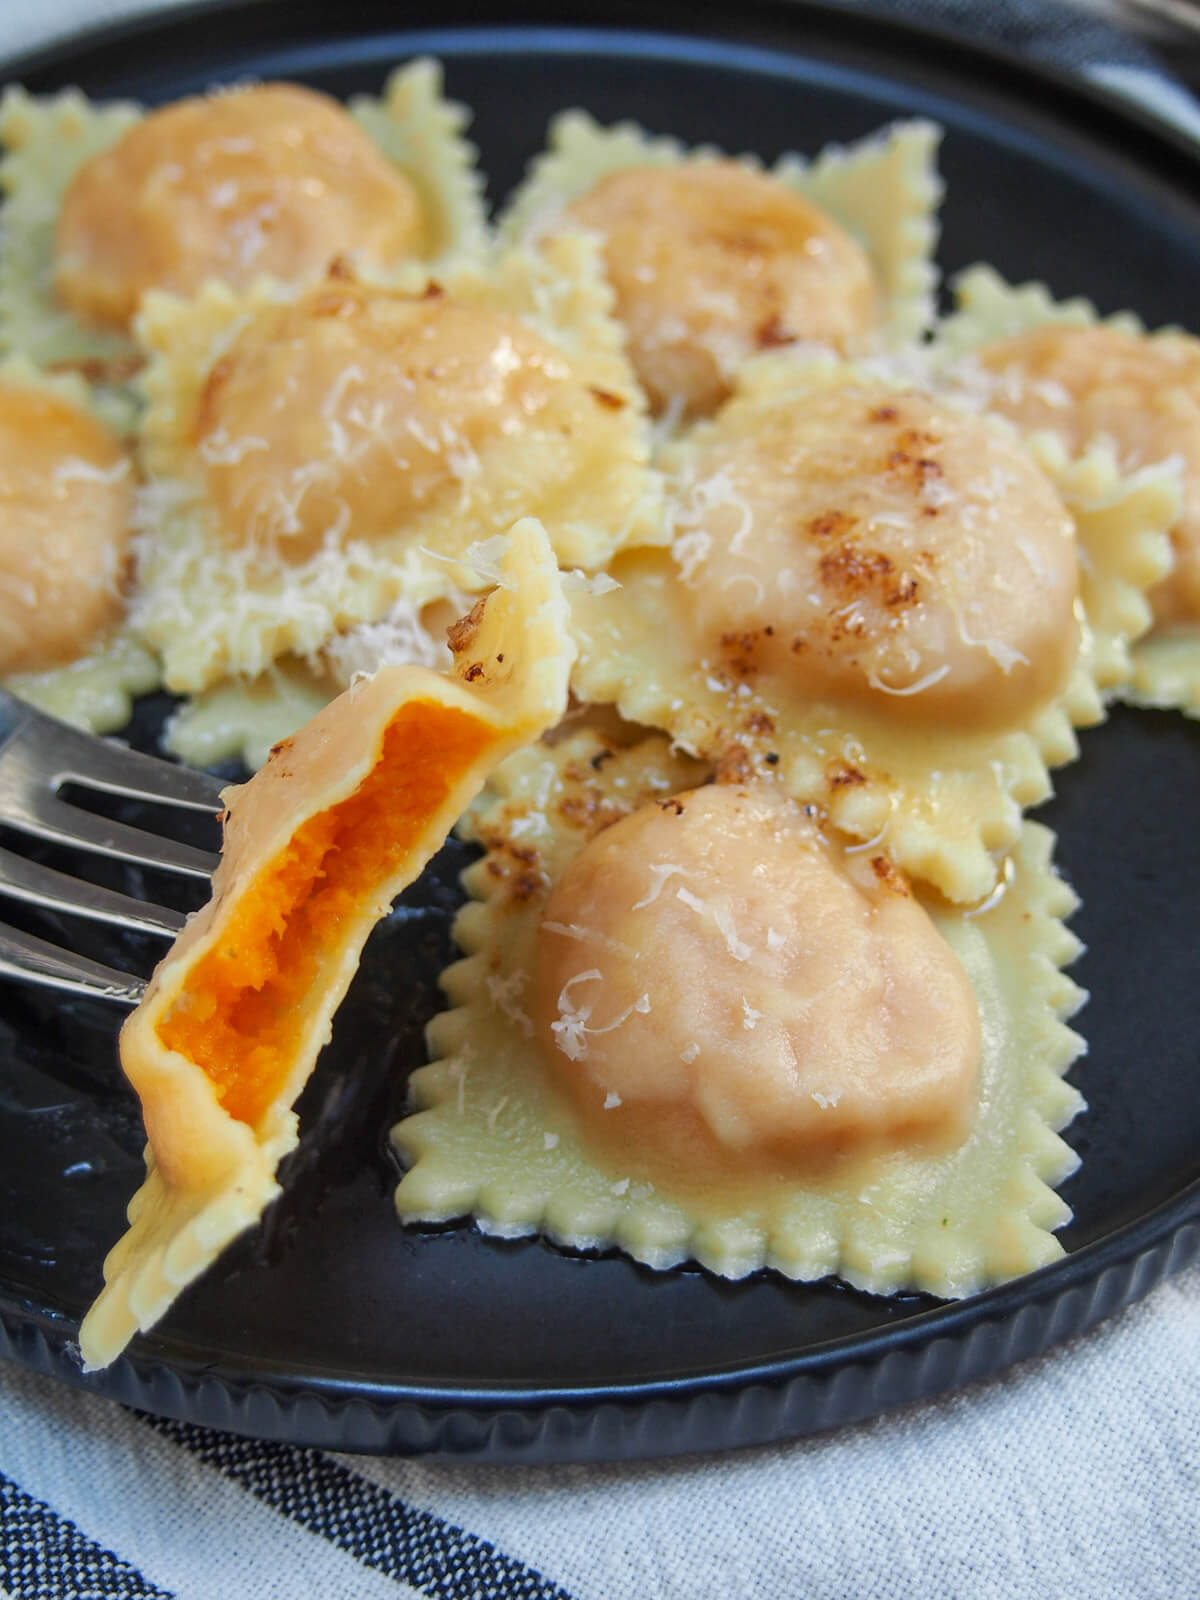 plate of sweet potato ravioli with one bitten into showing filling on fork at front